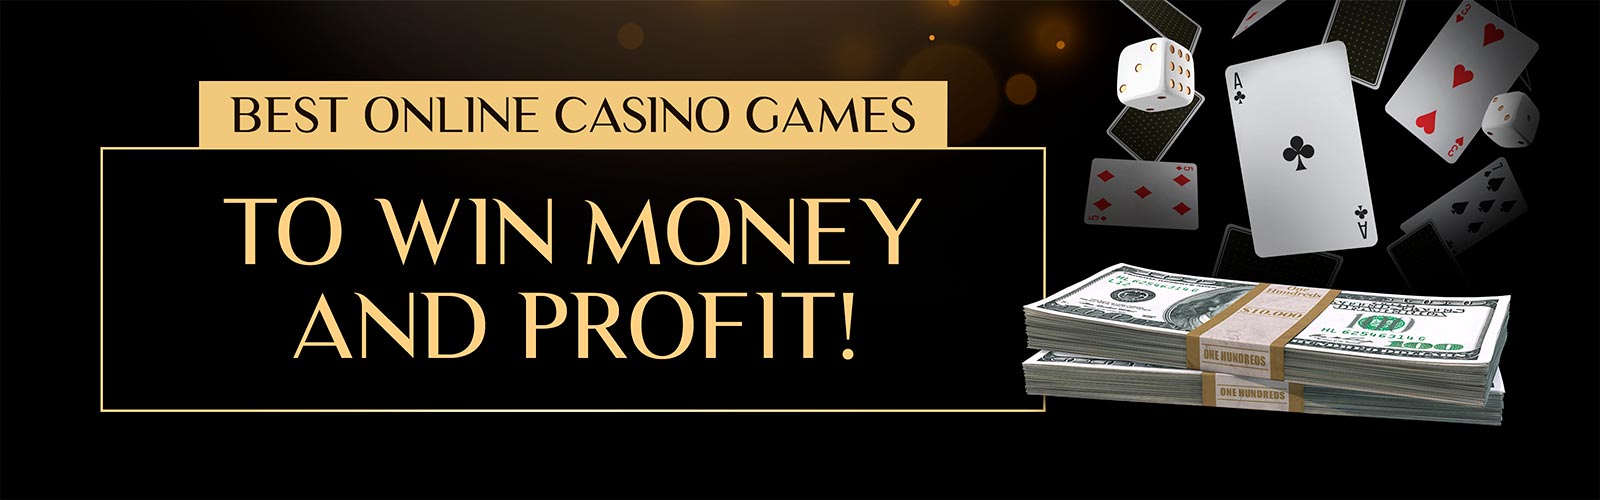 Best casino slots to play and win